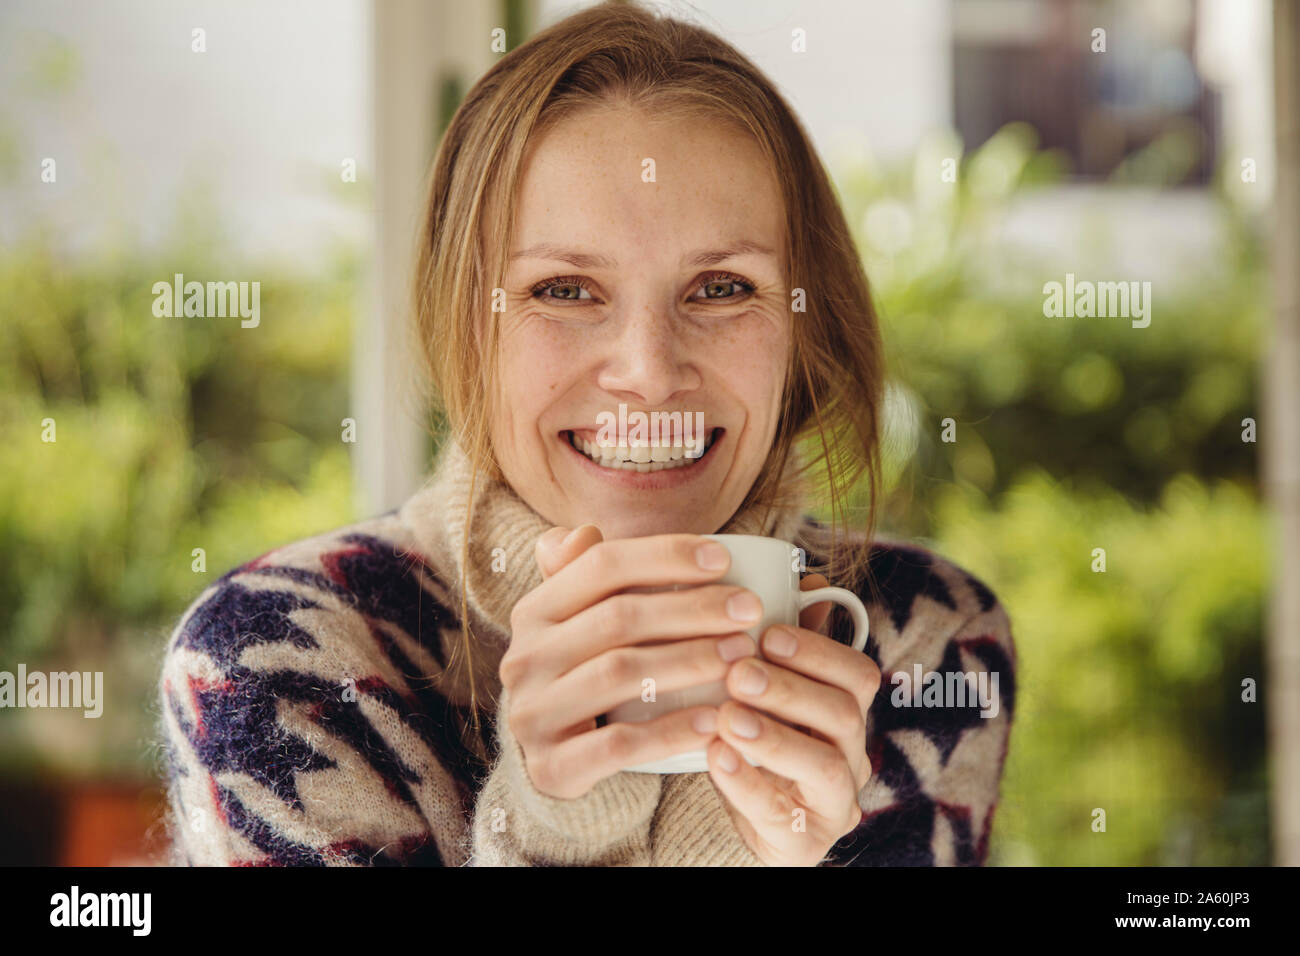 Portrait of smiling young woman wearing fluffy sweater holding a cup Stock Photo